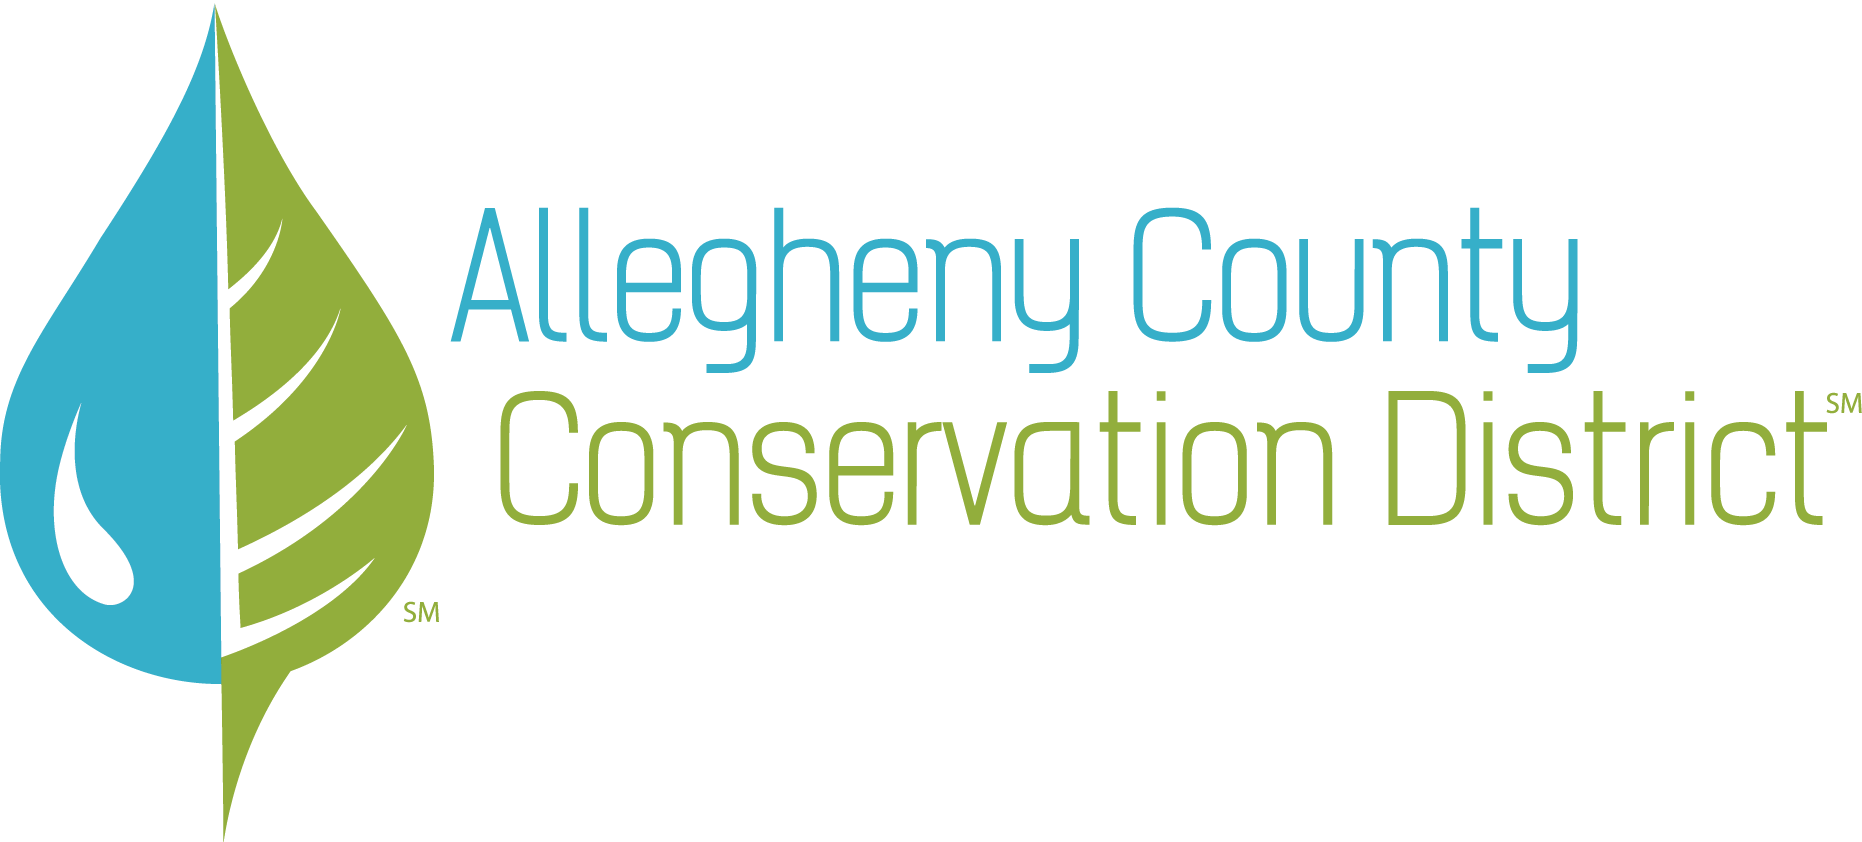 Conservation Logo - Allegheny County Conservation District - Home